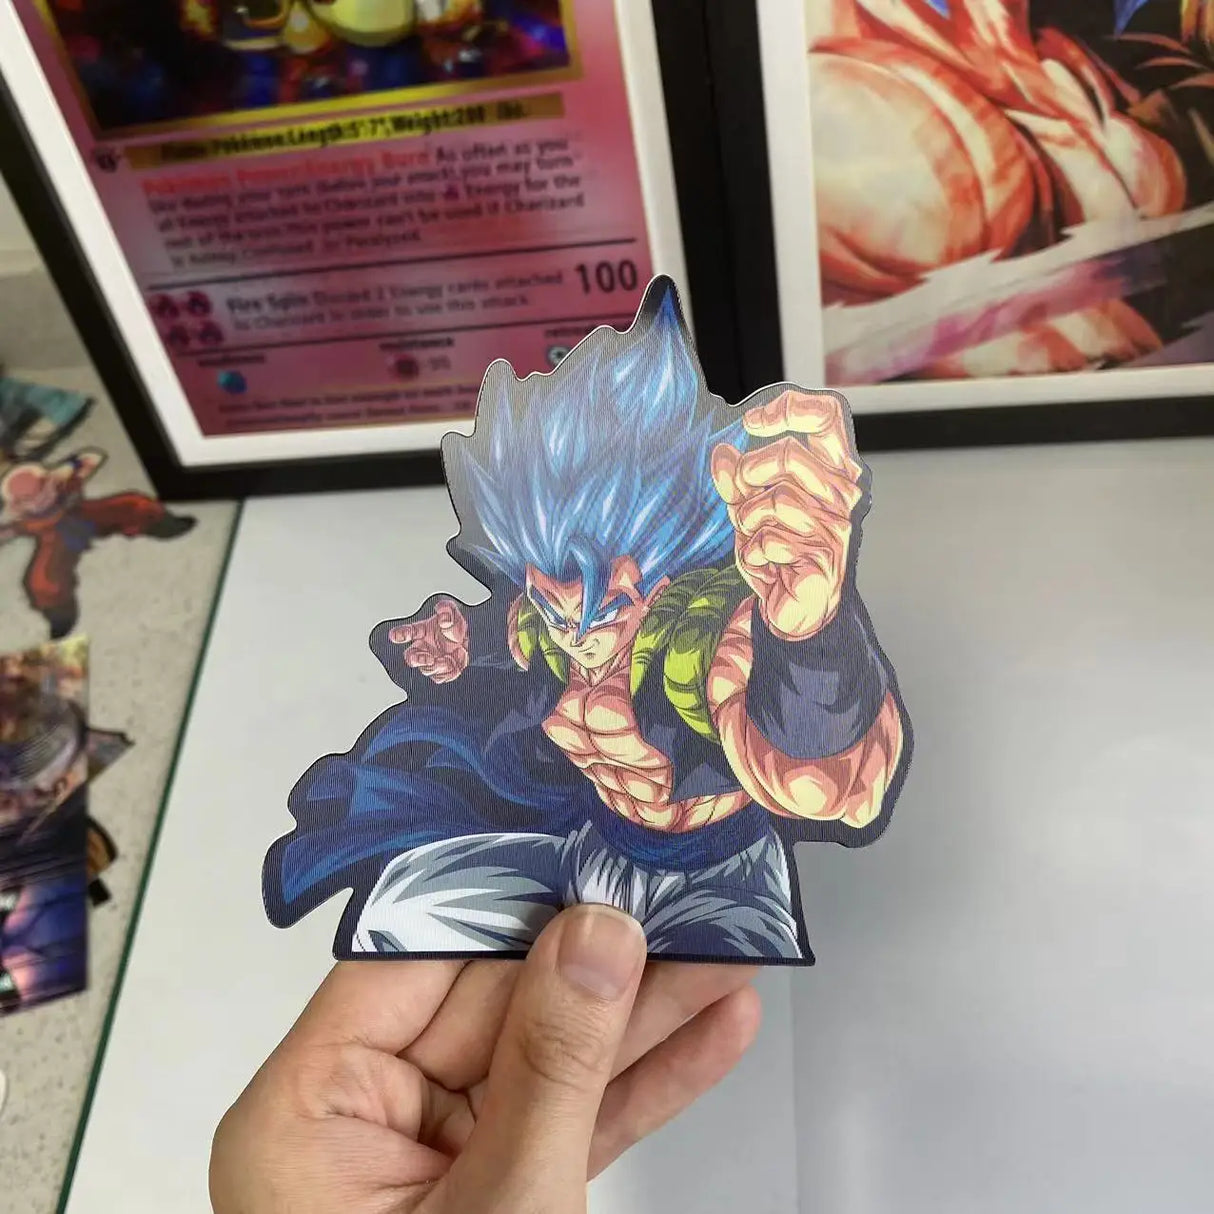 Buy Dragon Ball Z Stickers Online In India -  India